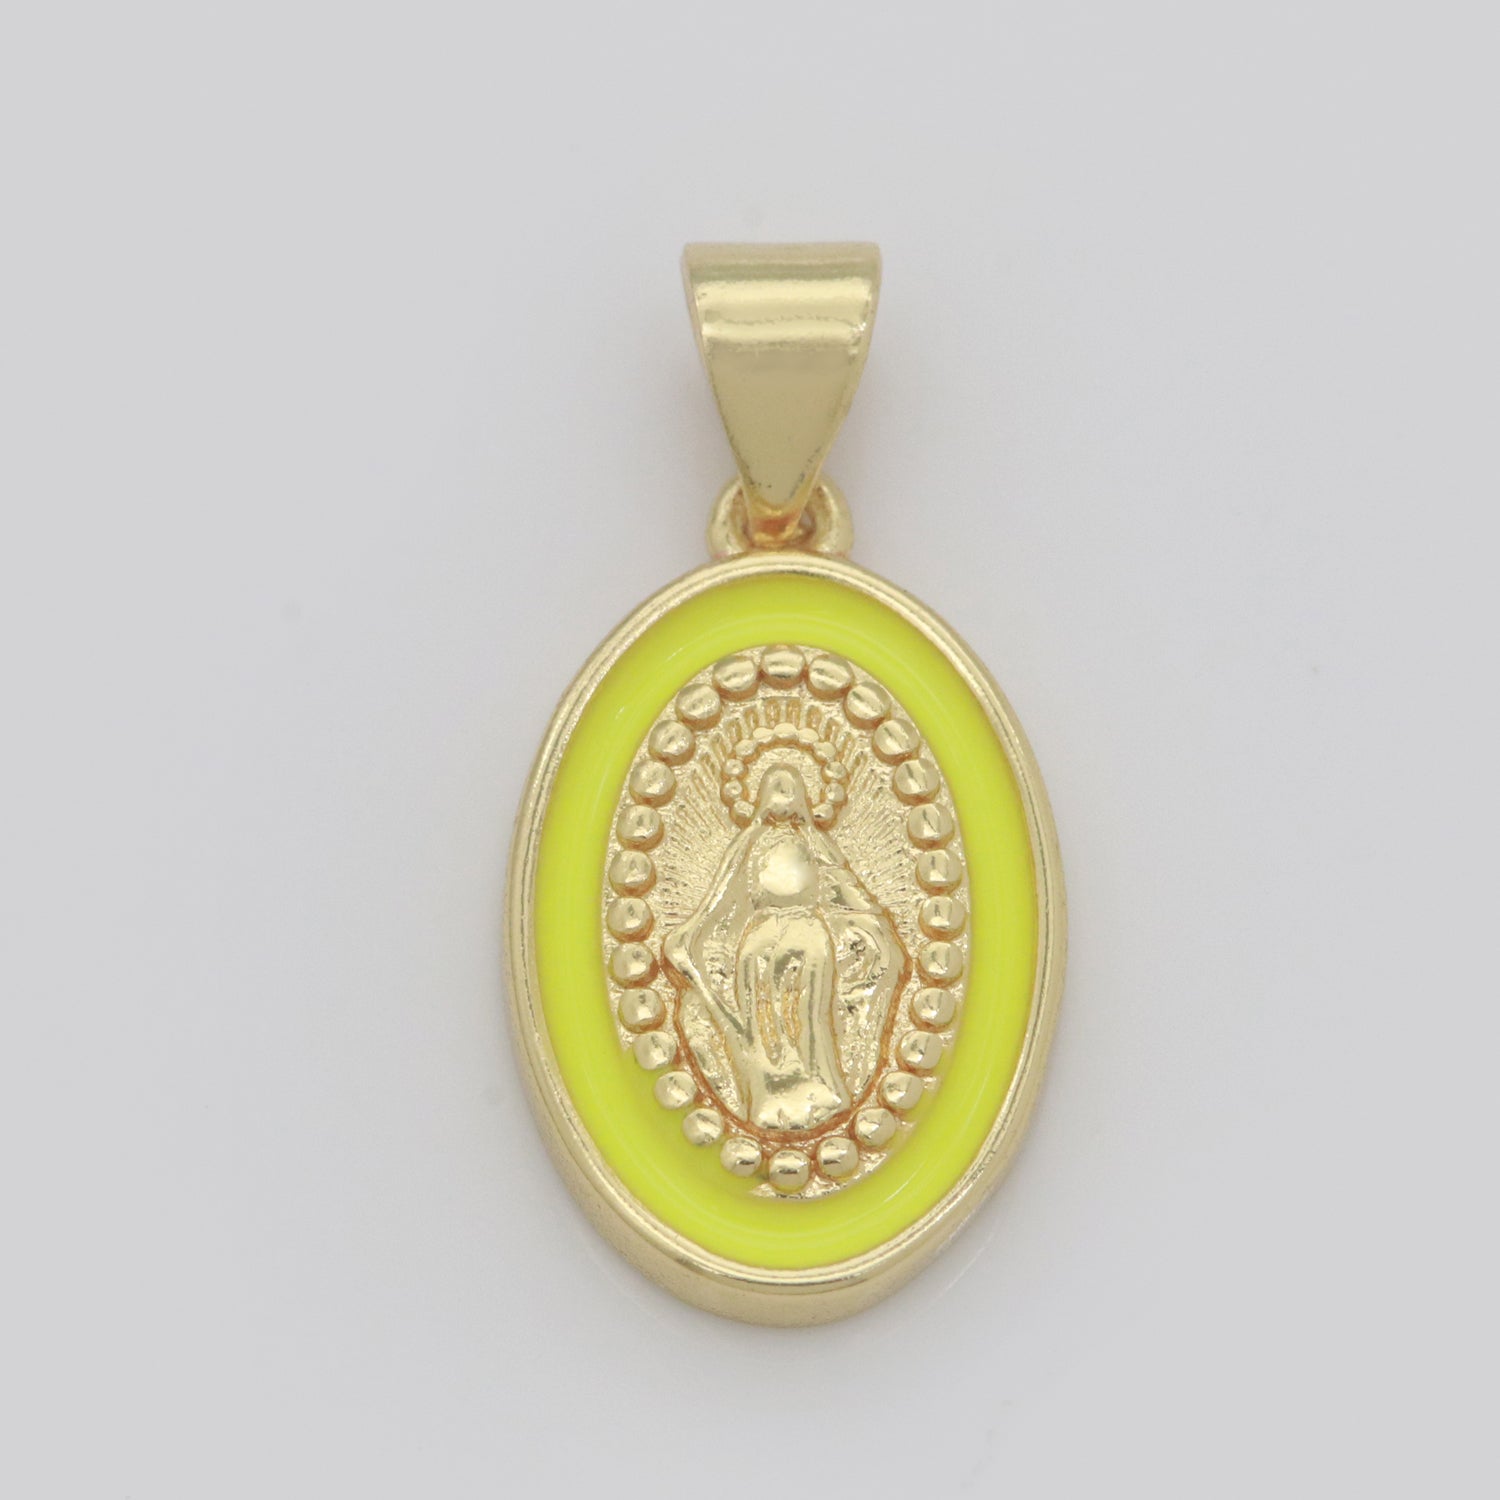 Dainty Miraculous Lady Charm gold medallion Charm, gold filled Virgin Mary religious medal Saint Pendant Religious Coin Catholic Enamel Jewelry - DLUXCA